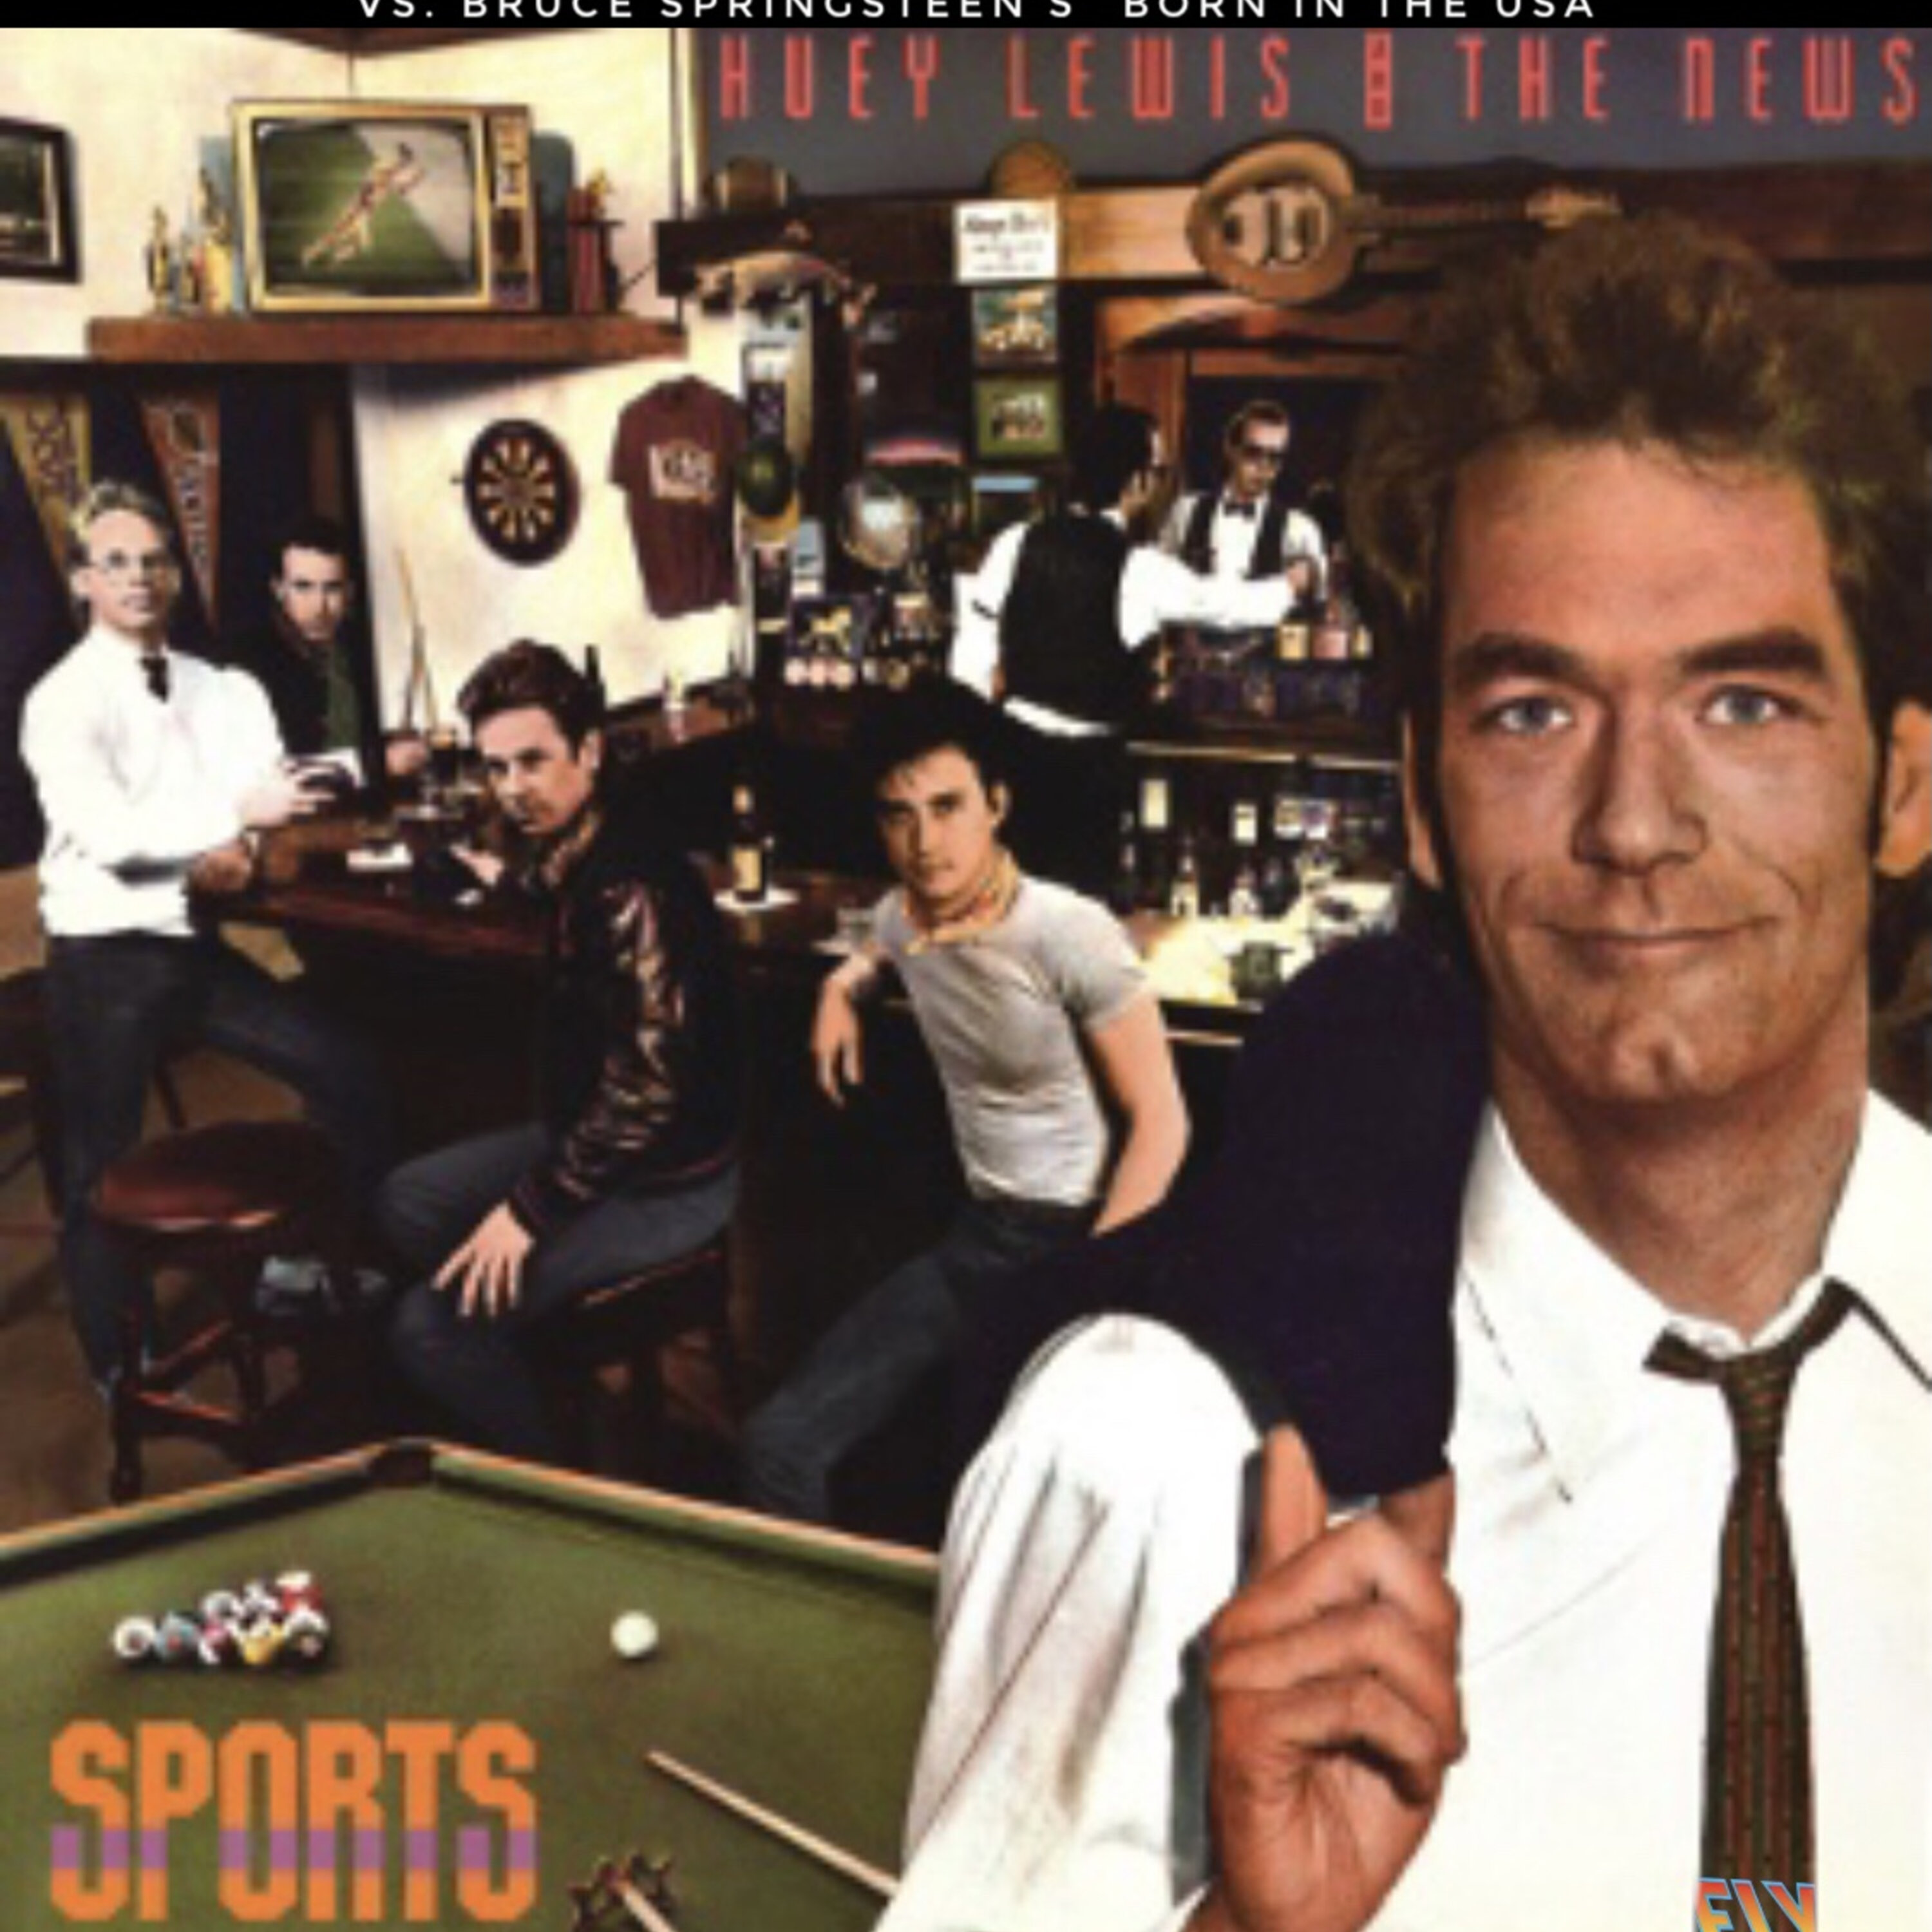 Huey Lewis and the News "Sports" vs. Bruce Springsteen's "Born in the USA" Image